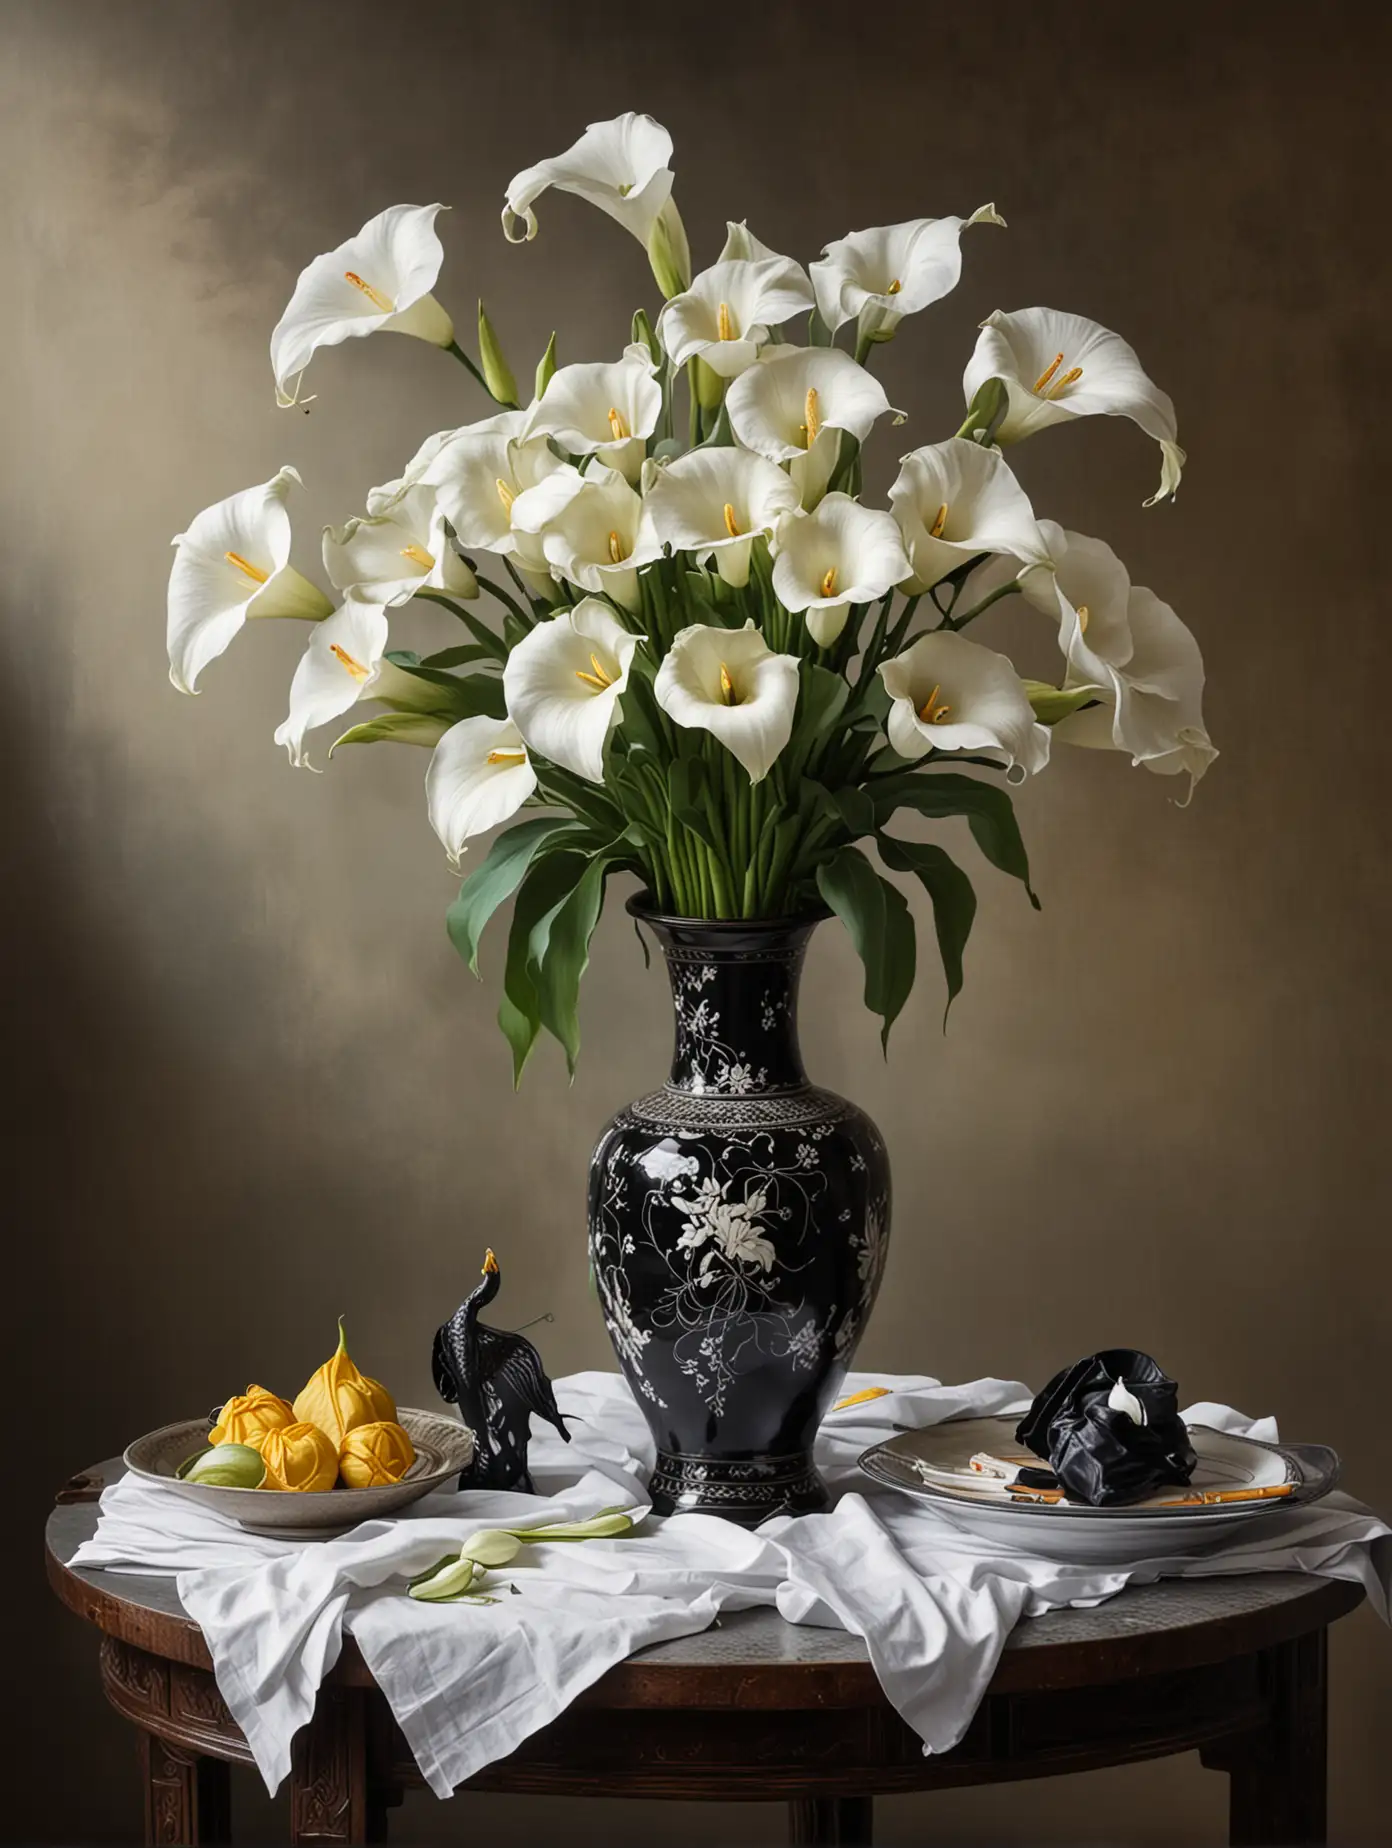 A STILL LIFE PAINTING, WITH A BLACK ORIENTAL VASE, DECORATED WITH CRANE BIRDS,  VASE CONTAINING GIGANTIC WHITE CALLA LILIES SHOW ONE SMALL  FOLDED NAPKIN ON THE TABLE,  ONLY ONE VASE  ON THE TABLE